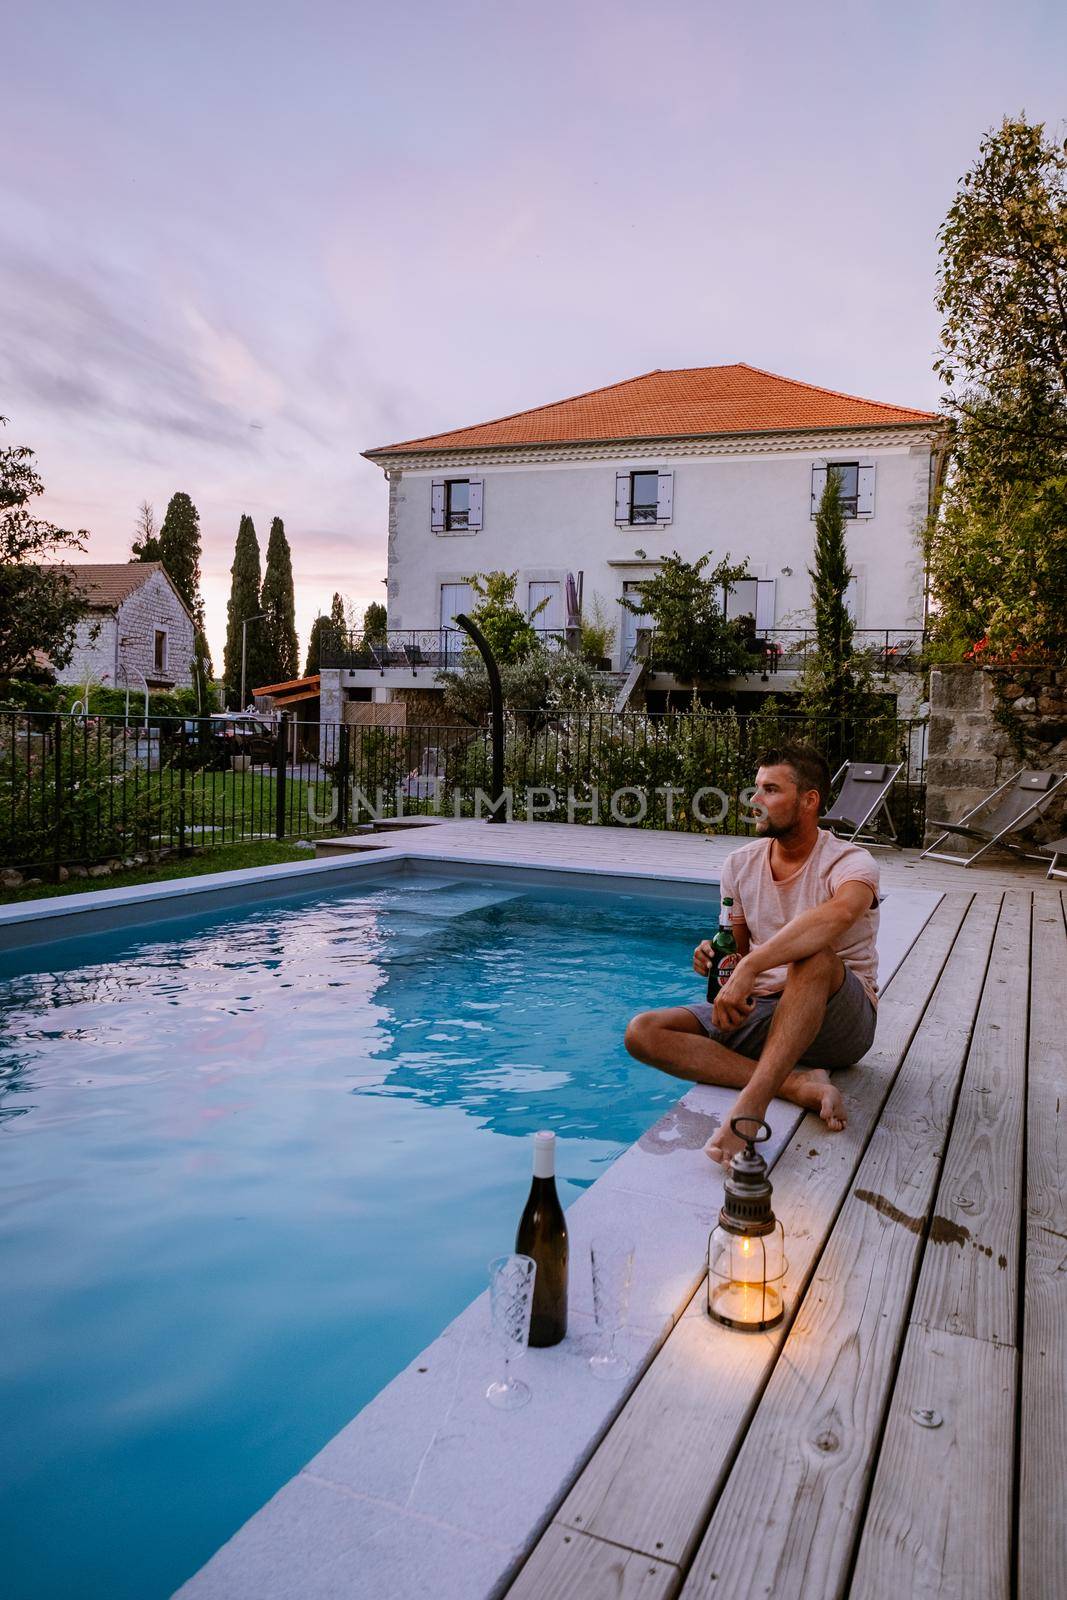 French vacation home with wooden deck and swimming pool in the Ardeche France. guy relaxing by the pool with wooden deck during luxury vacation at an holiday home in South of France by fokkebok